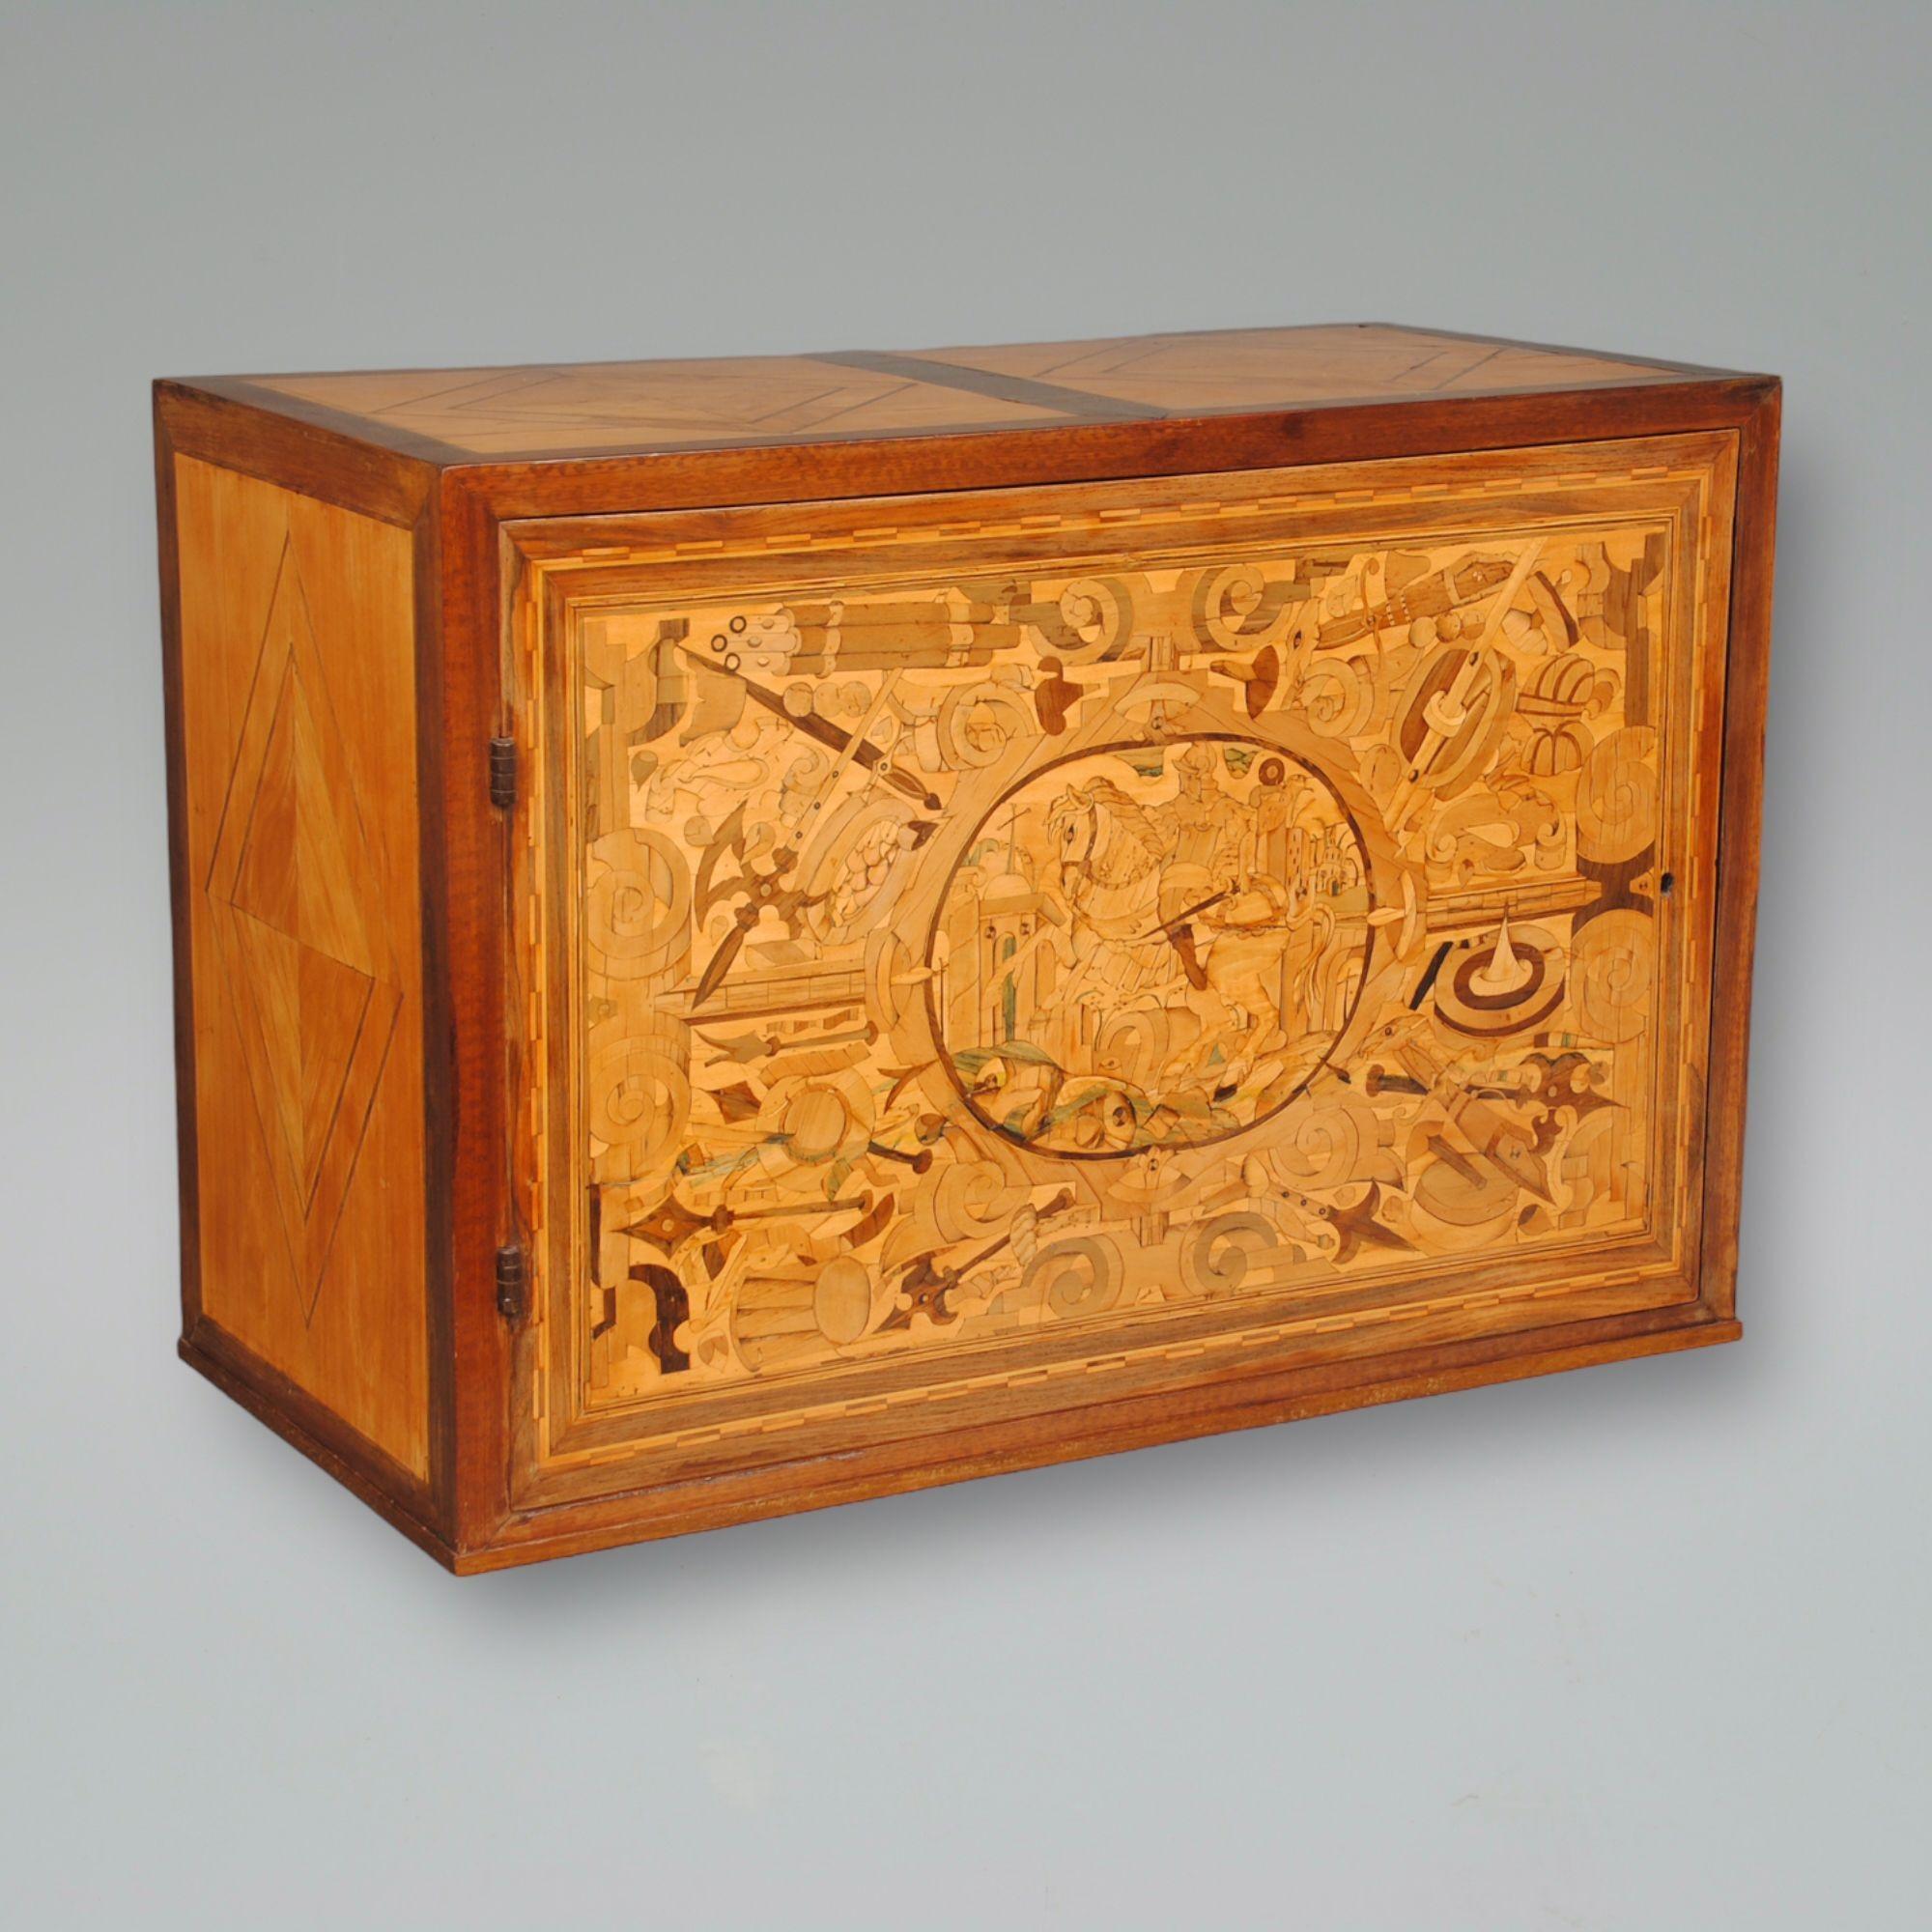 A German single door table cabinet. The front is inlaid with a Knight on horse back set within an oval and surrounded with a trophy of arms. The fitted interior with drawers and cupboards which are finely inlaid with architectural scenes. Retaining